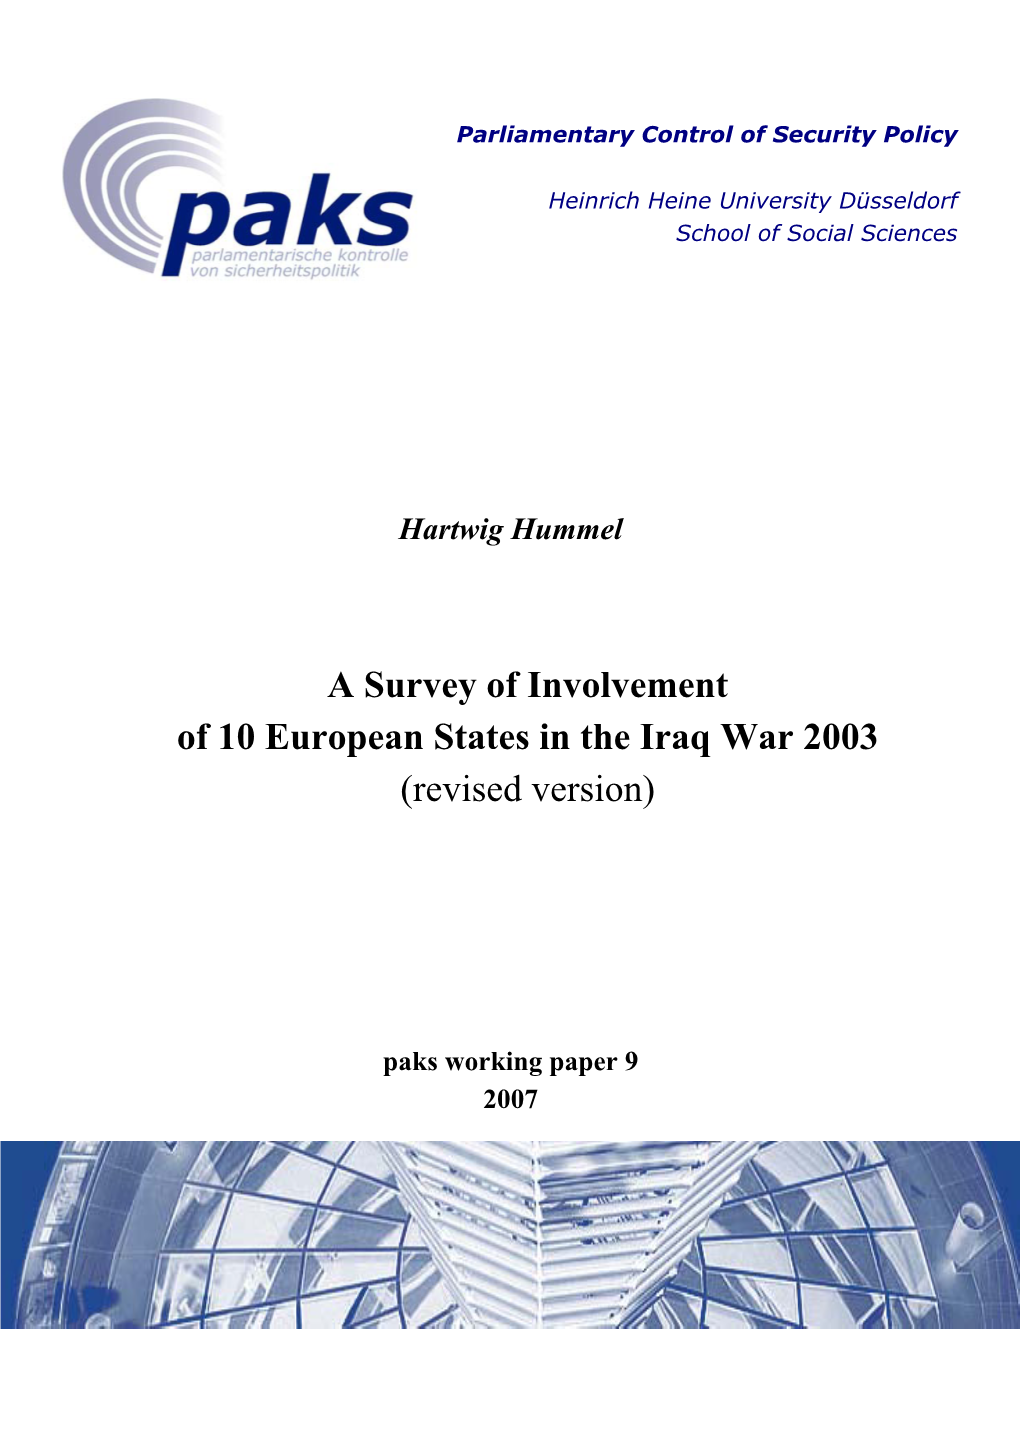 A Survey of Involvement of 10 European States in the Iraq War 2003 (Revised Version)